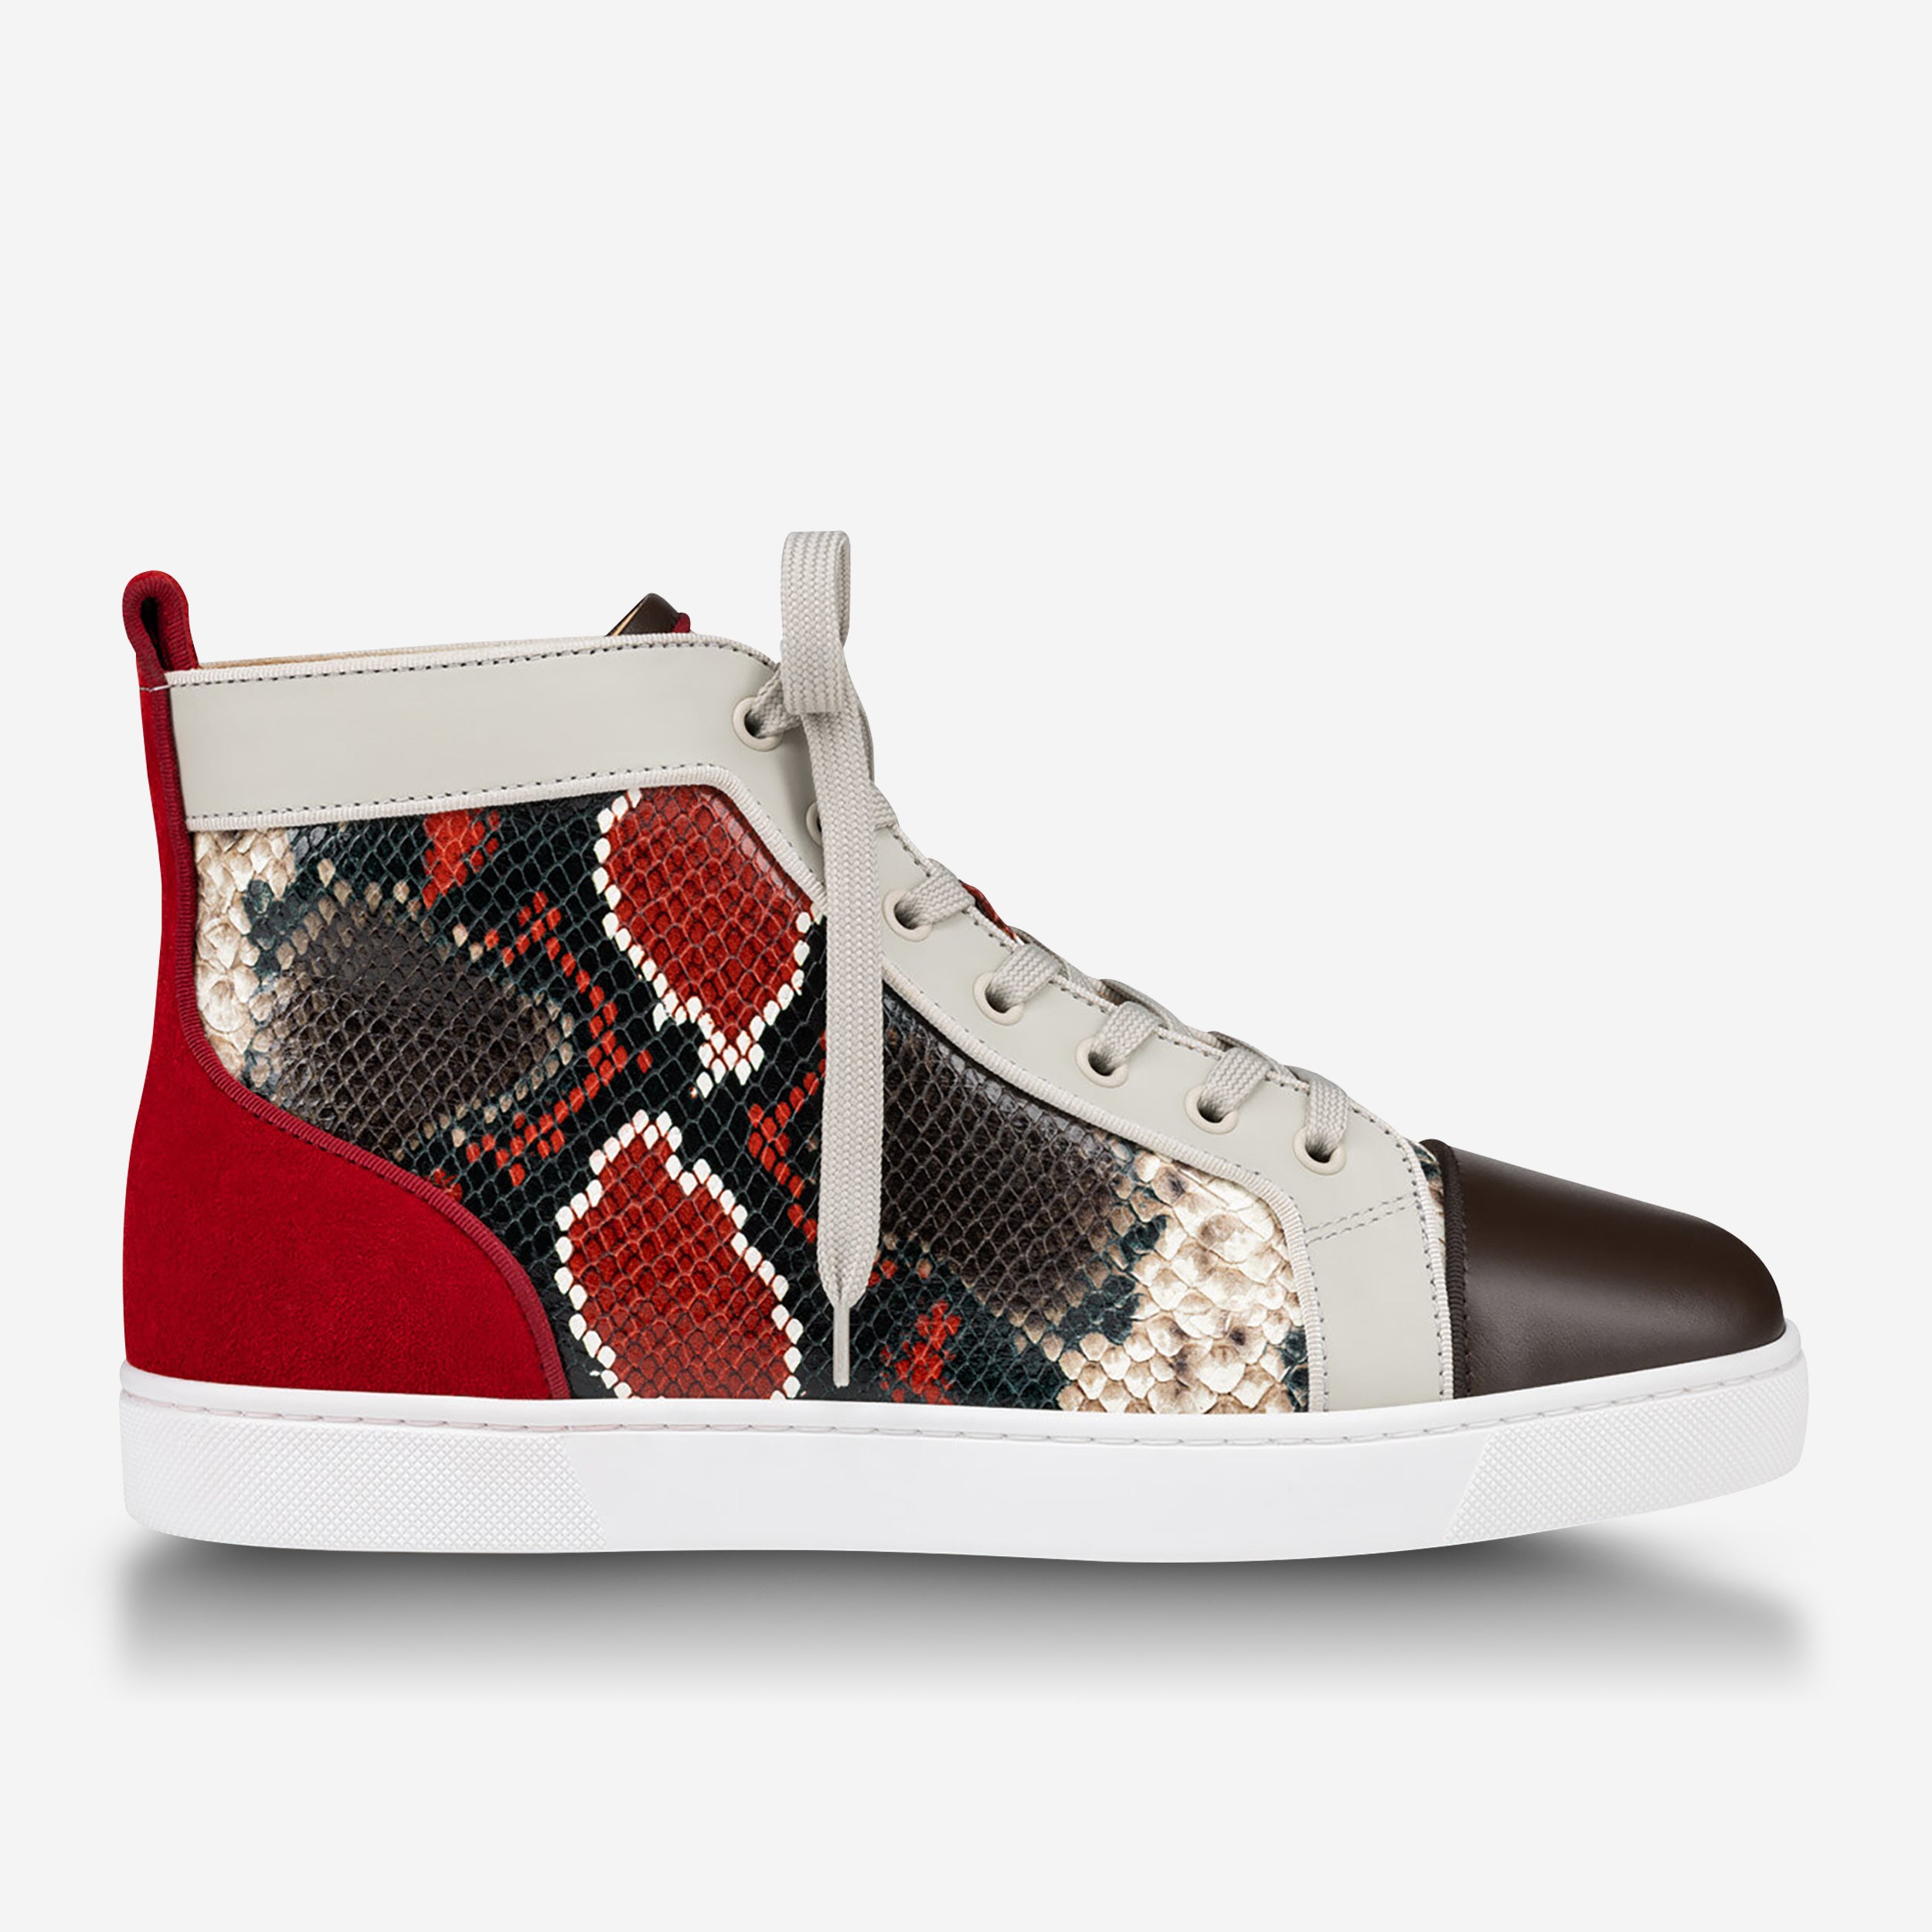 Christian Louboutin Is Definitely In A Portugal State Of Mind